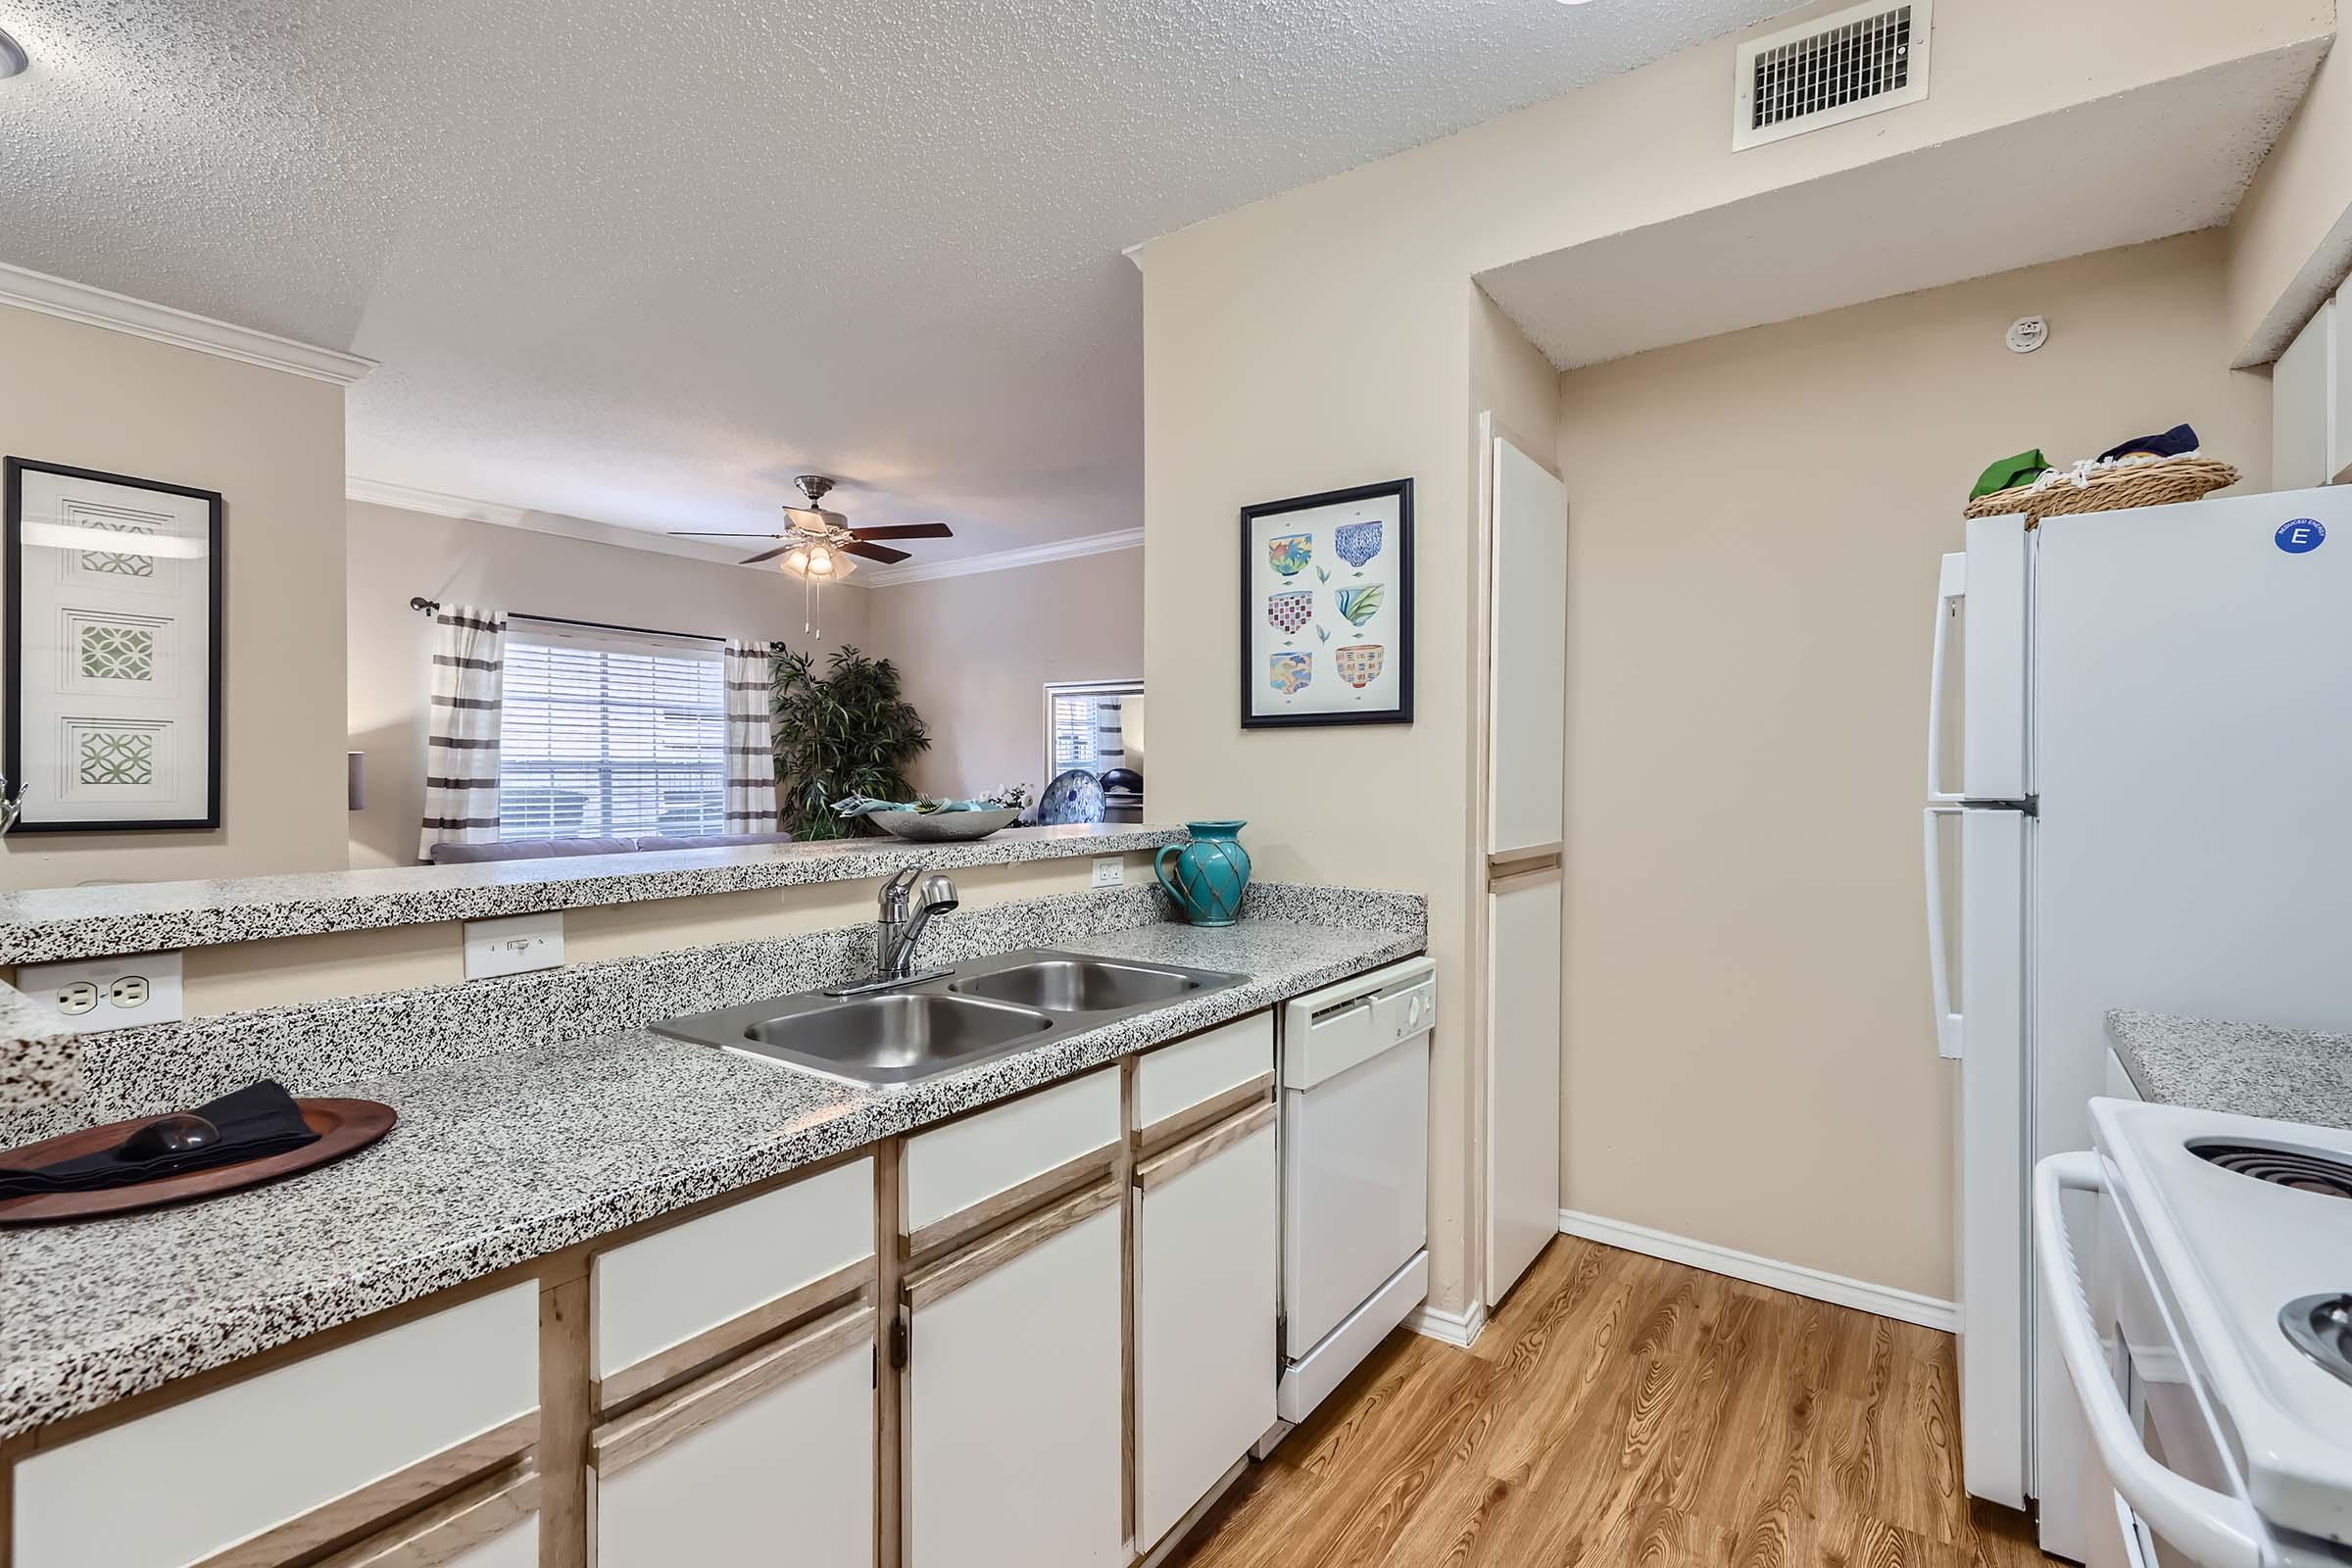 The kitchen with white cabinets near the living area with a big window at Rise Skyline.